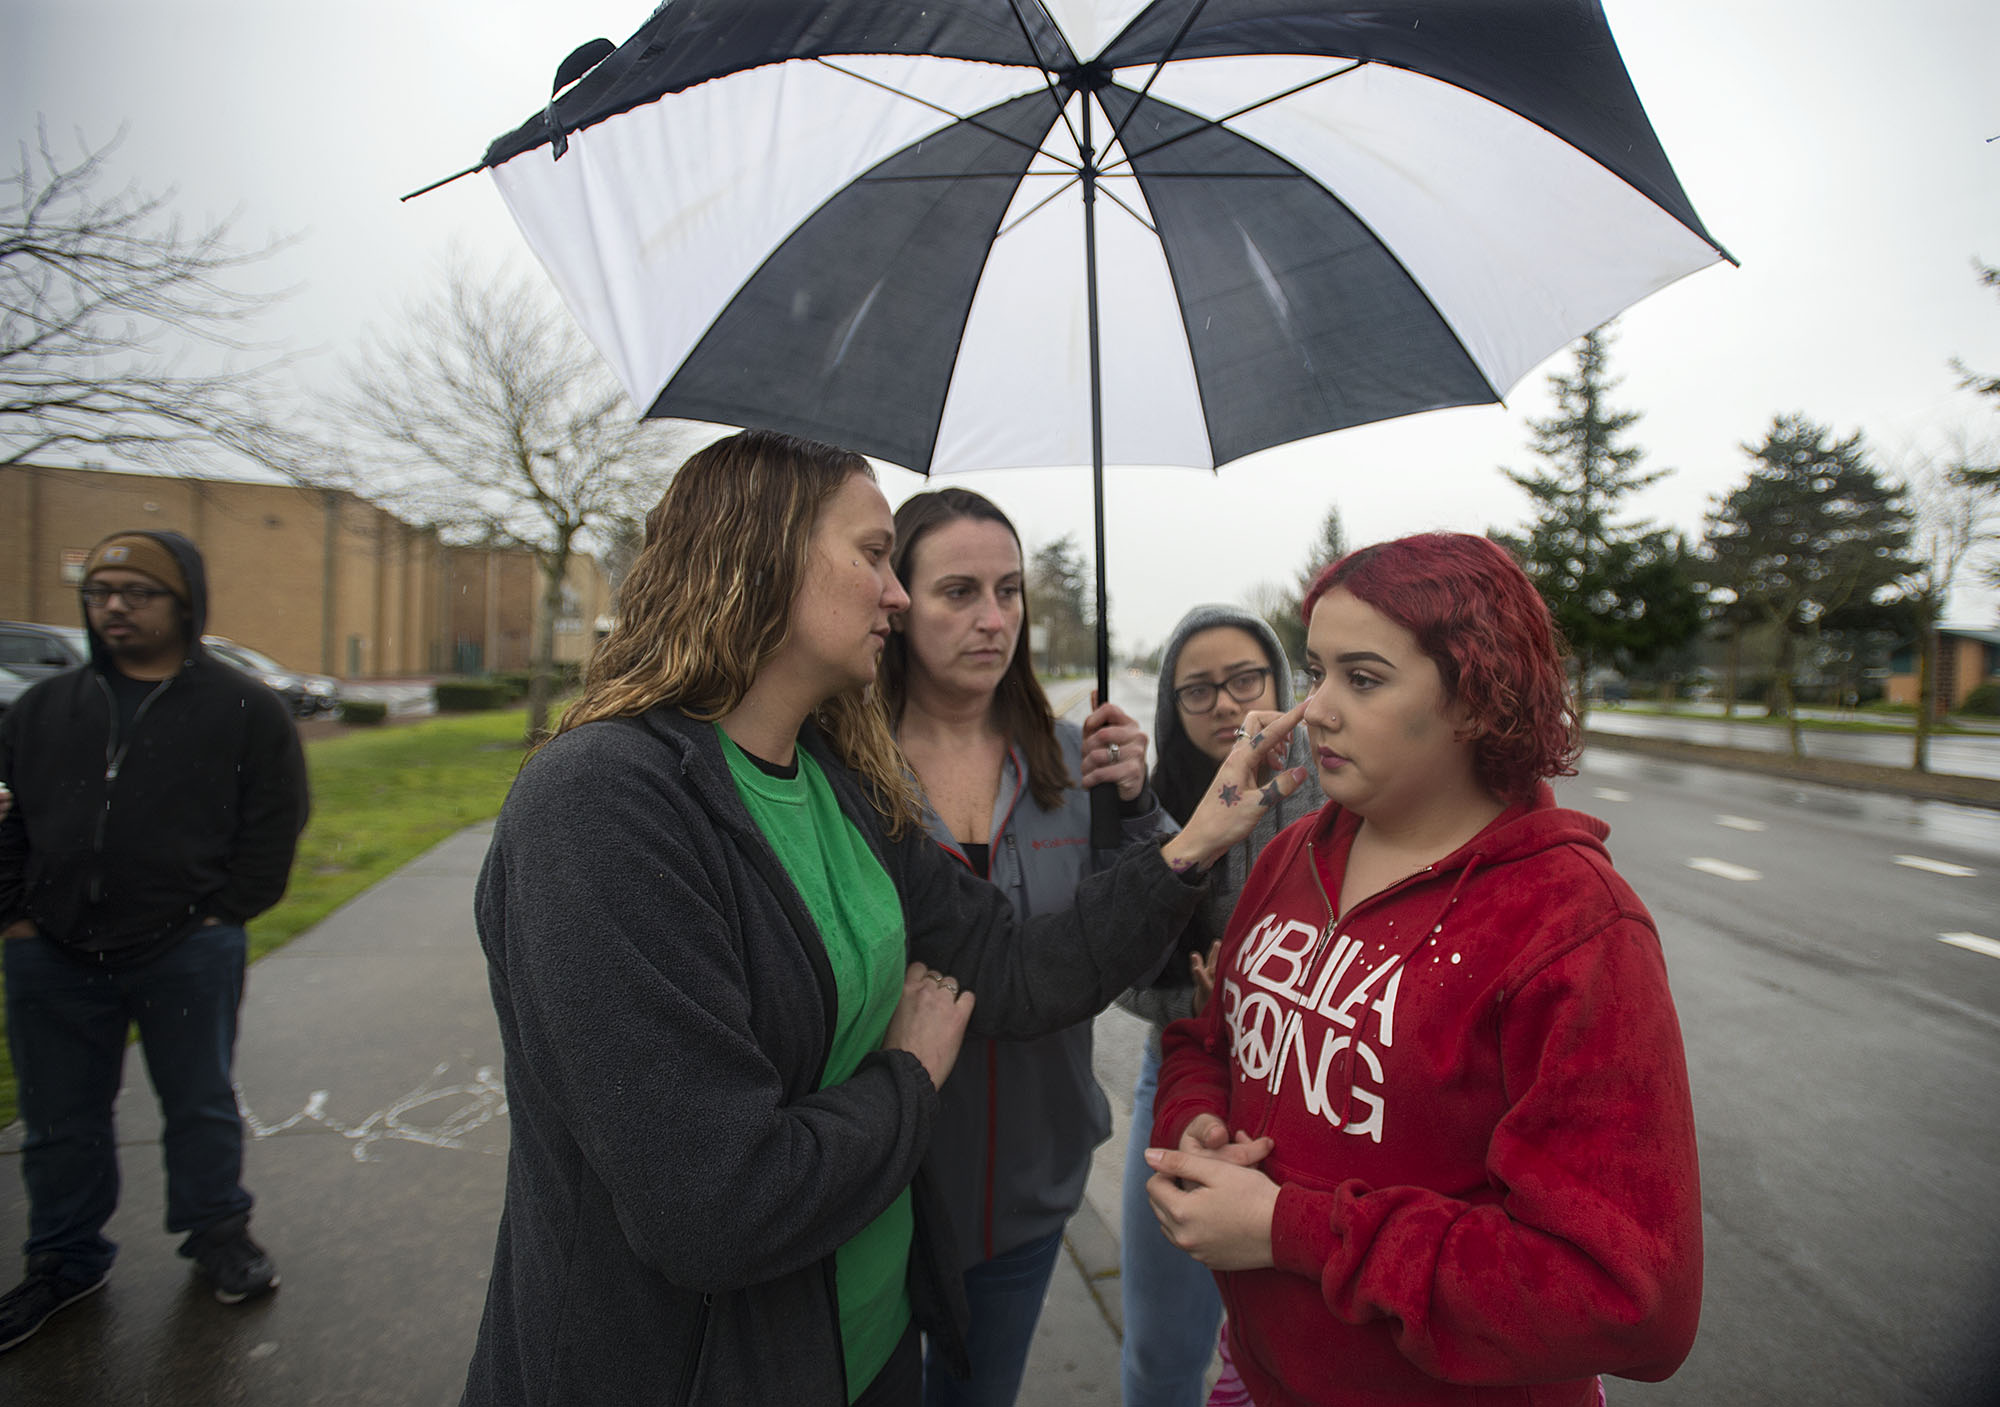 Lindsey Smith, 13, right, is joined by her mom, Carrie Smith, left, her aunt, Leslie Goodnight, and family friend, Jasmine Freeman, as they look over injuries they say she sustained after a fellow student punched her in the face Wednesday, as seen outside McLoughlin Middle School on Friday afternoon, March 17, 2017. School district officials announced Vancouver police are investigating the allegations.